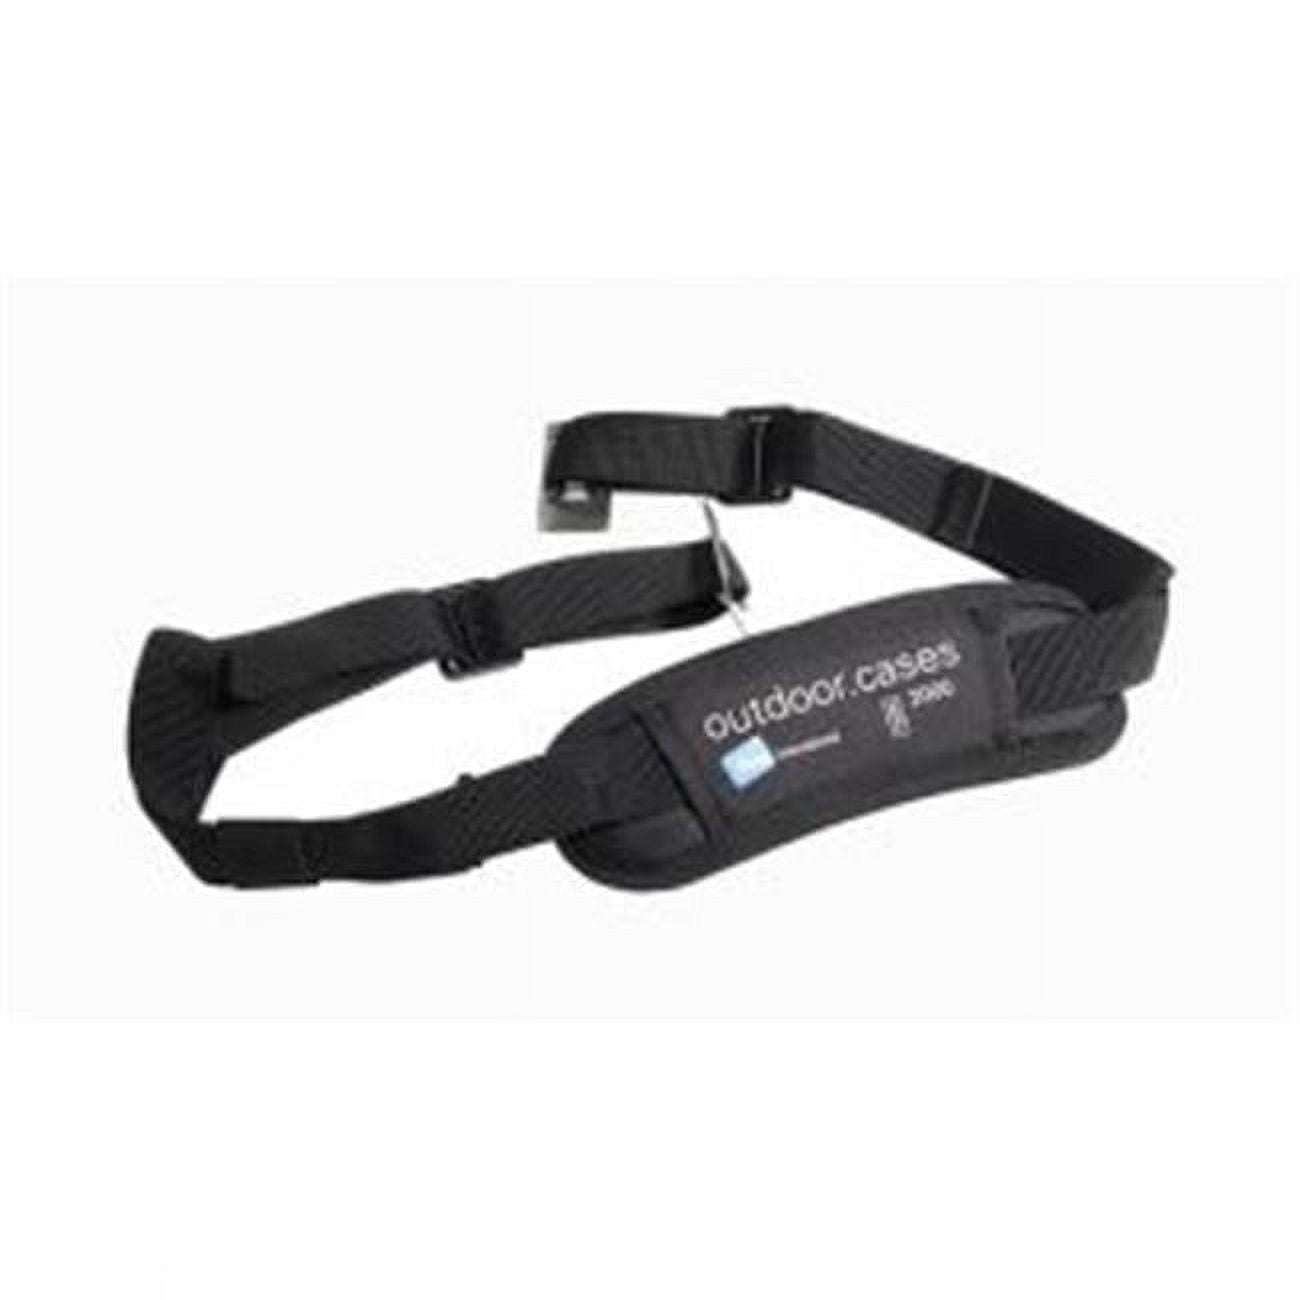 Picture of B&W International CS-2000 Type 2000 Outdoor Case Carrying Strap